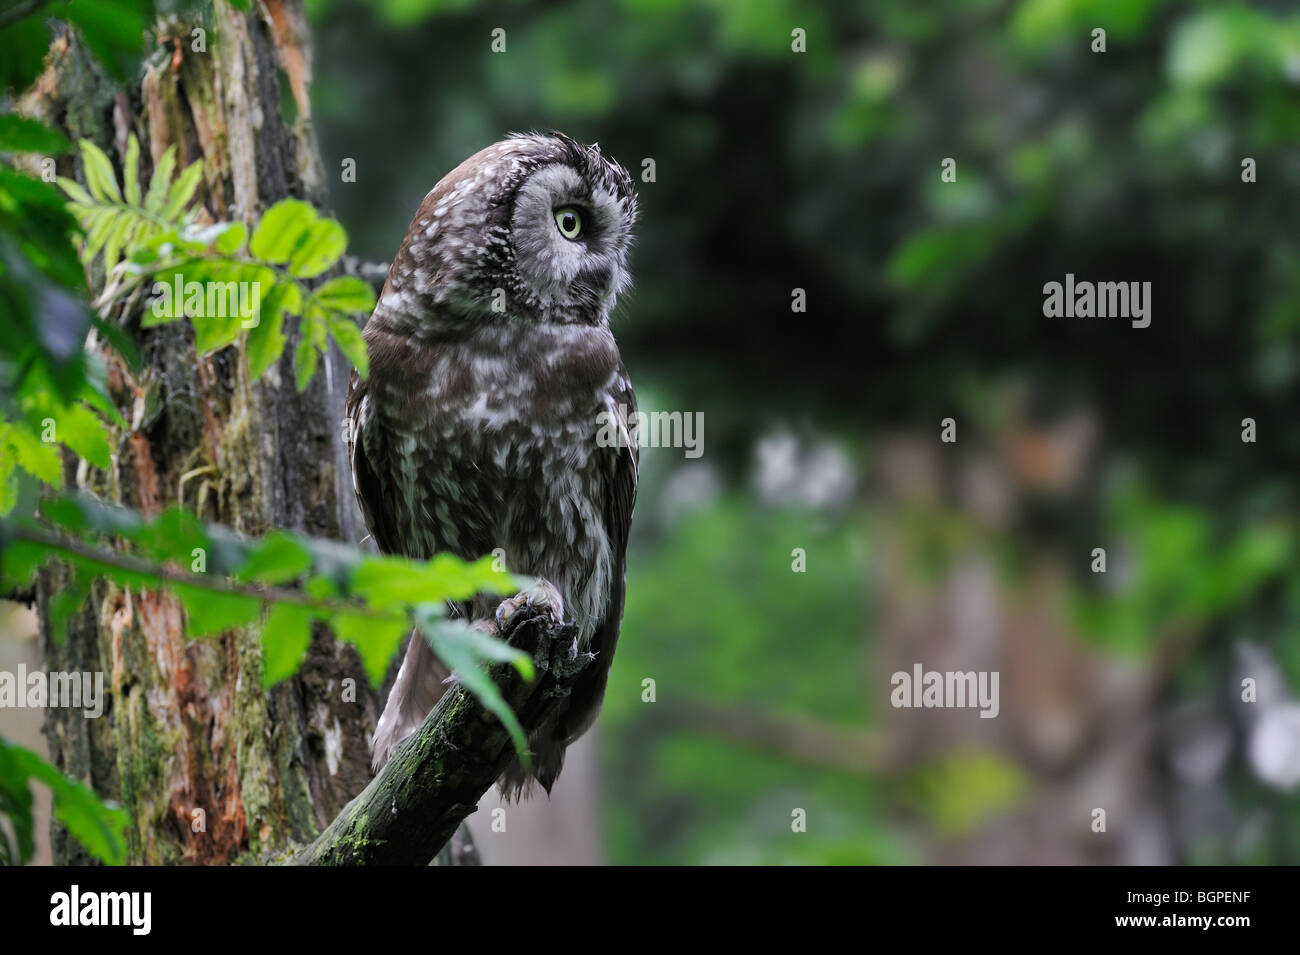 Tengmalm's Owl (Aegolius funereus) perched in tree in forest Stock Photo